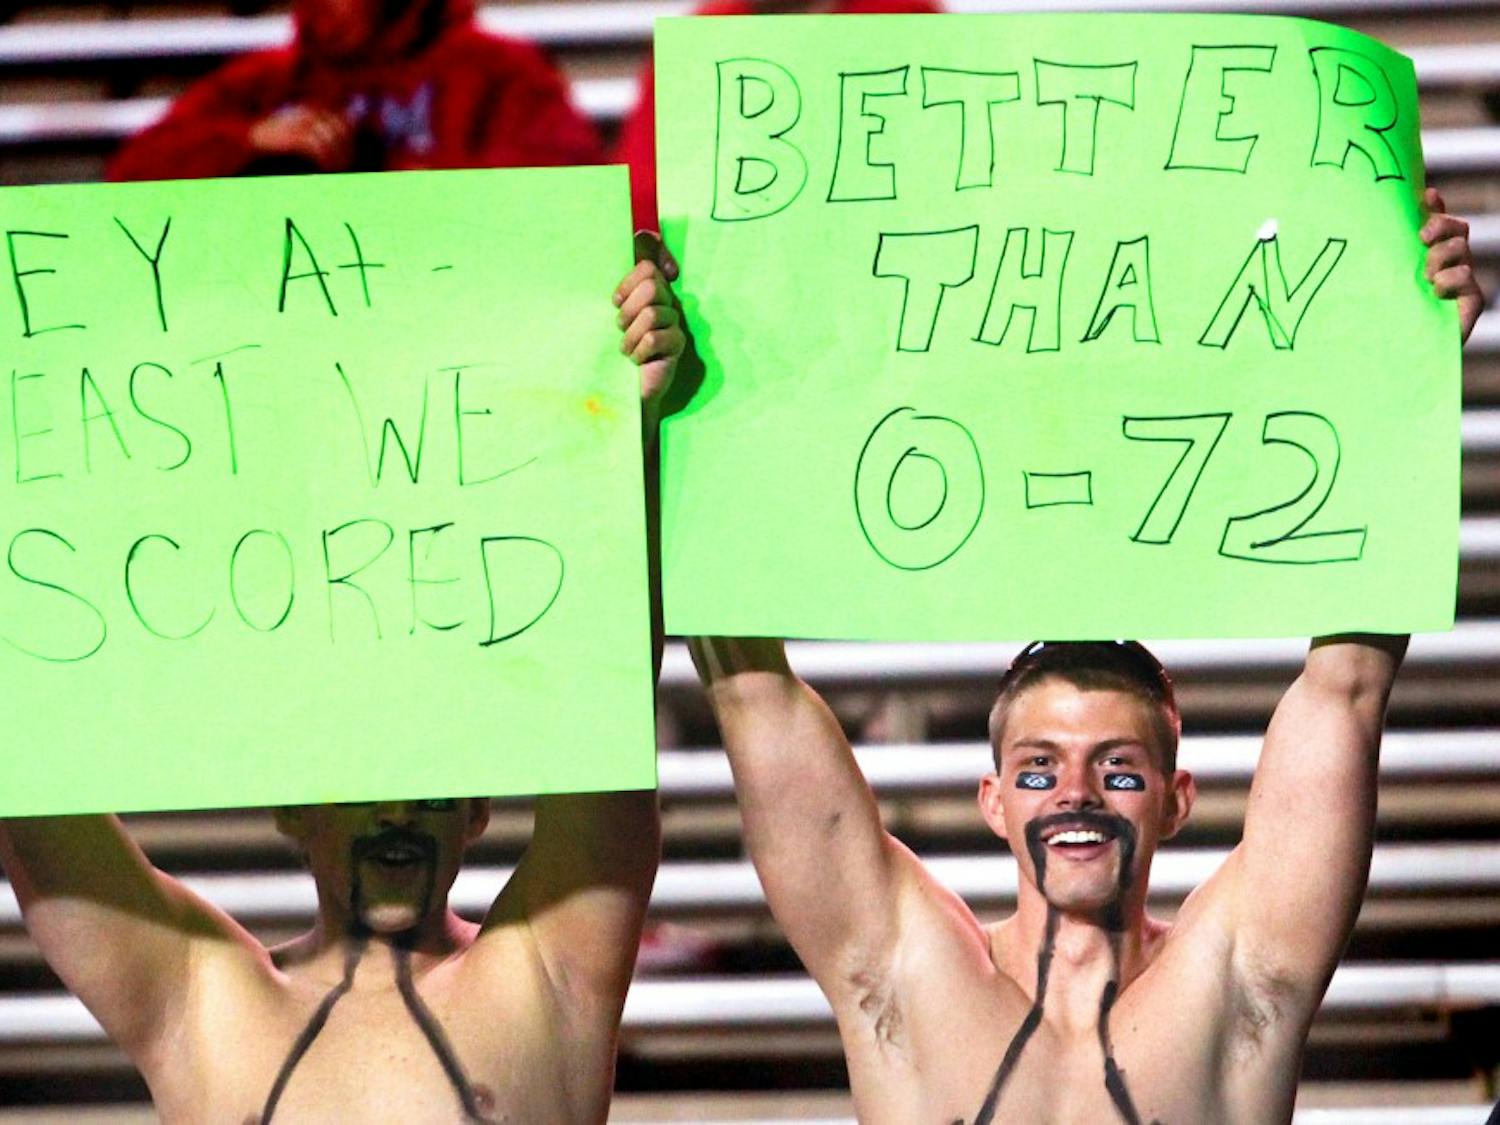 	UNM football fans try to make the most of the current season. The Lobos are 0-2 allowing 124 total points.